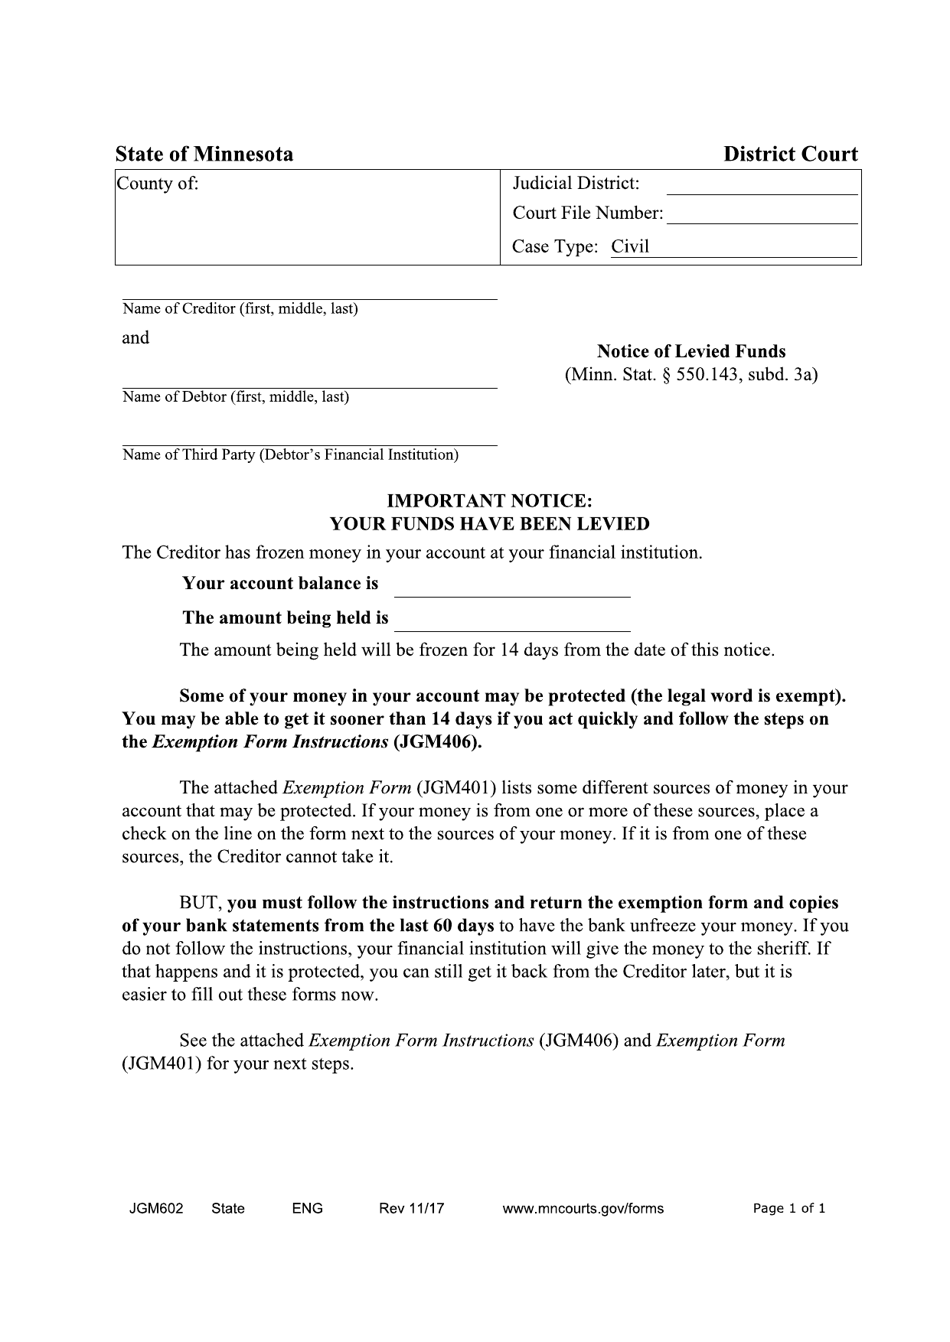 Form JGM602 Notice of Levied Funds - Minnesota, Page 1